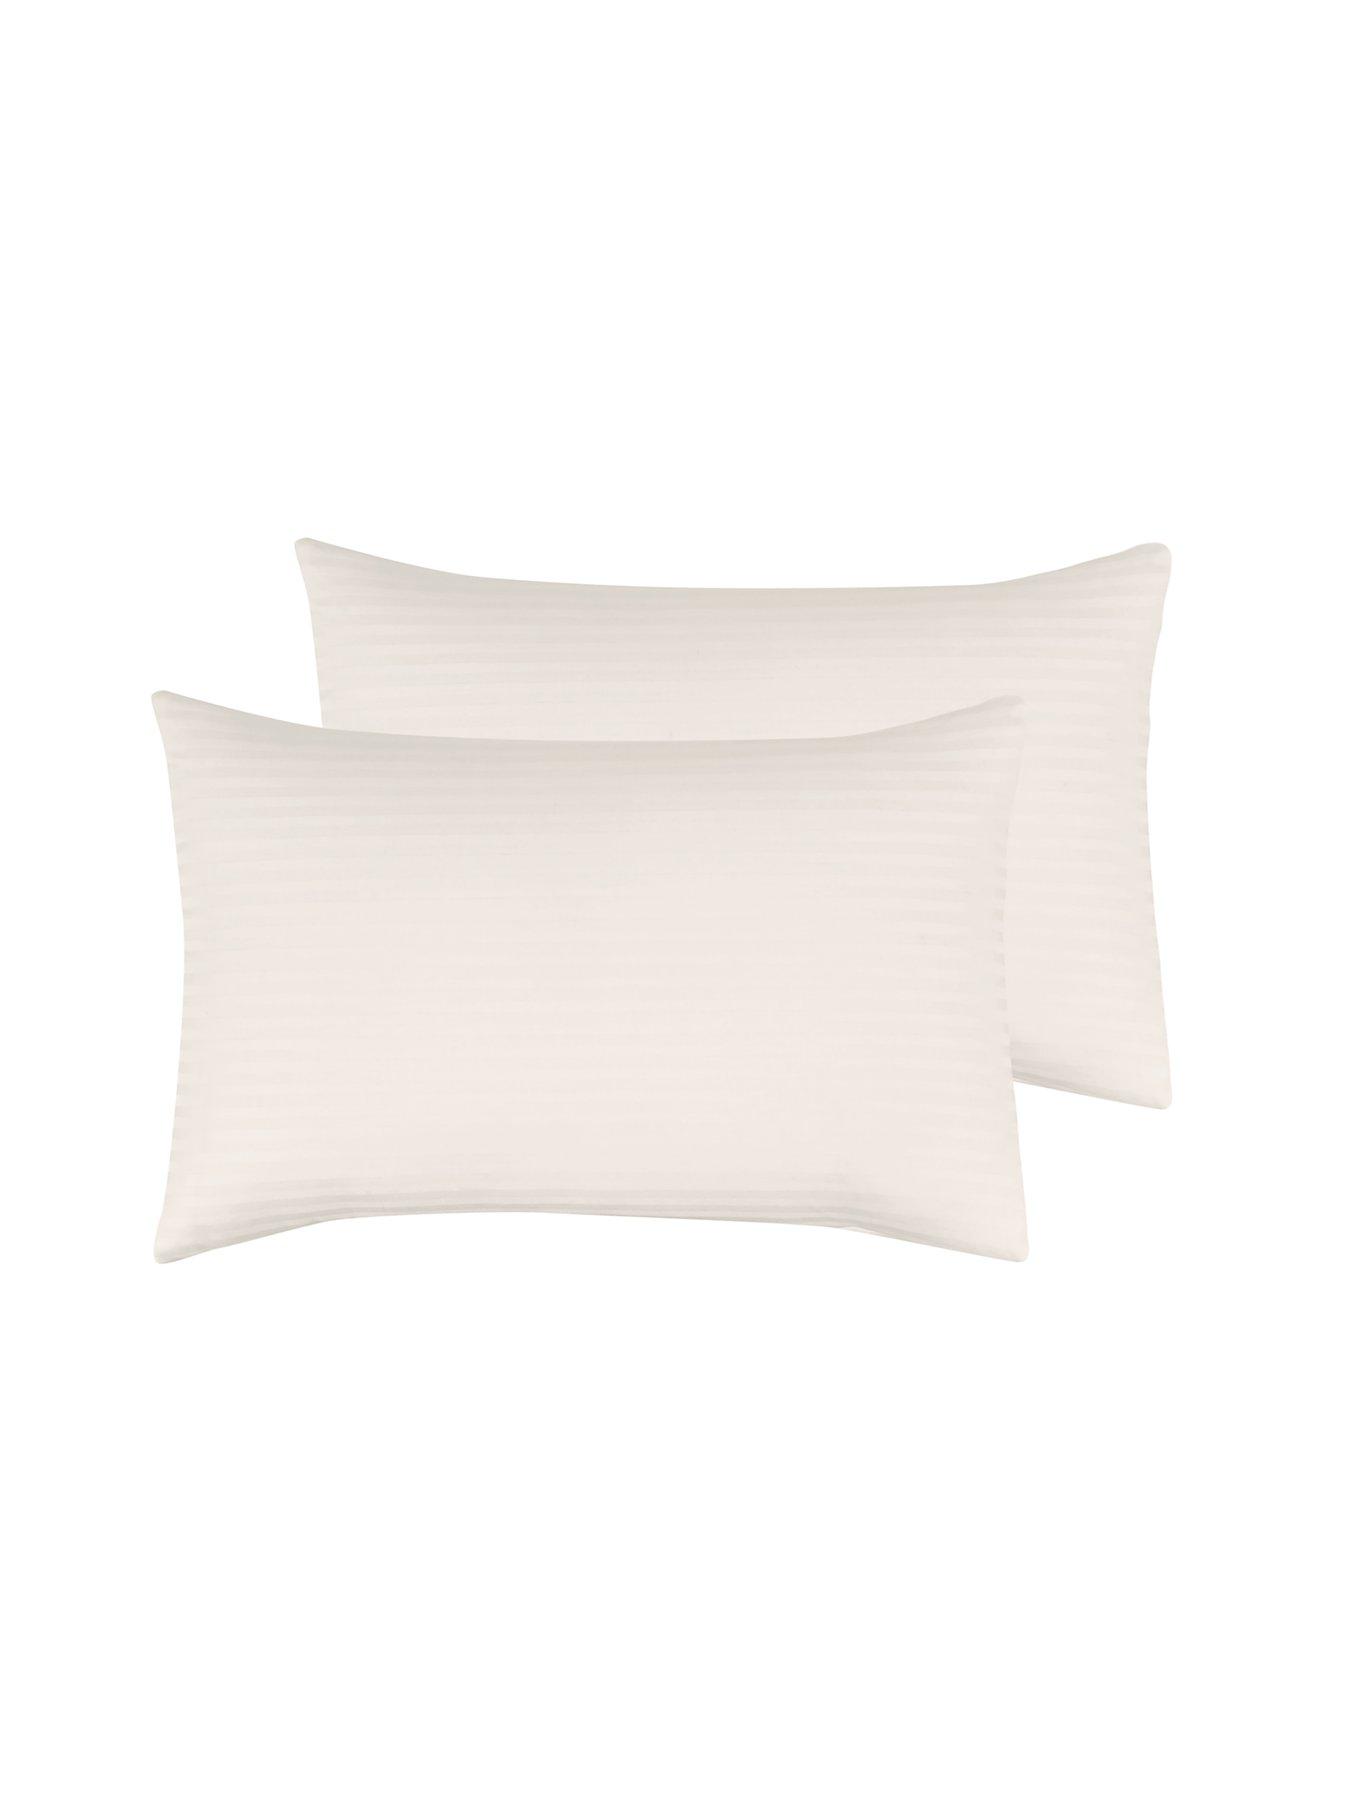 One Pair Housewife Stye Standard Pillow Cases Satin Stripe Egyptian Cotton 250 Thread Count